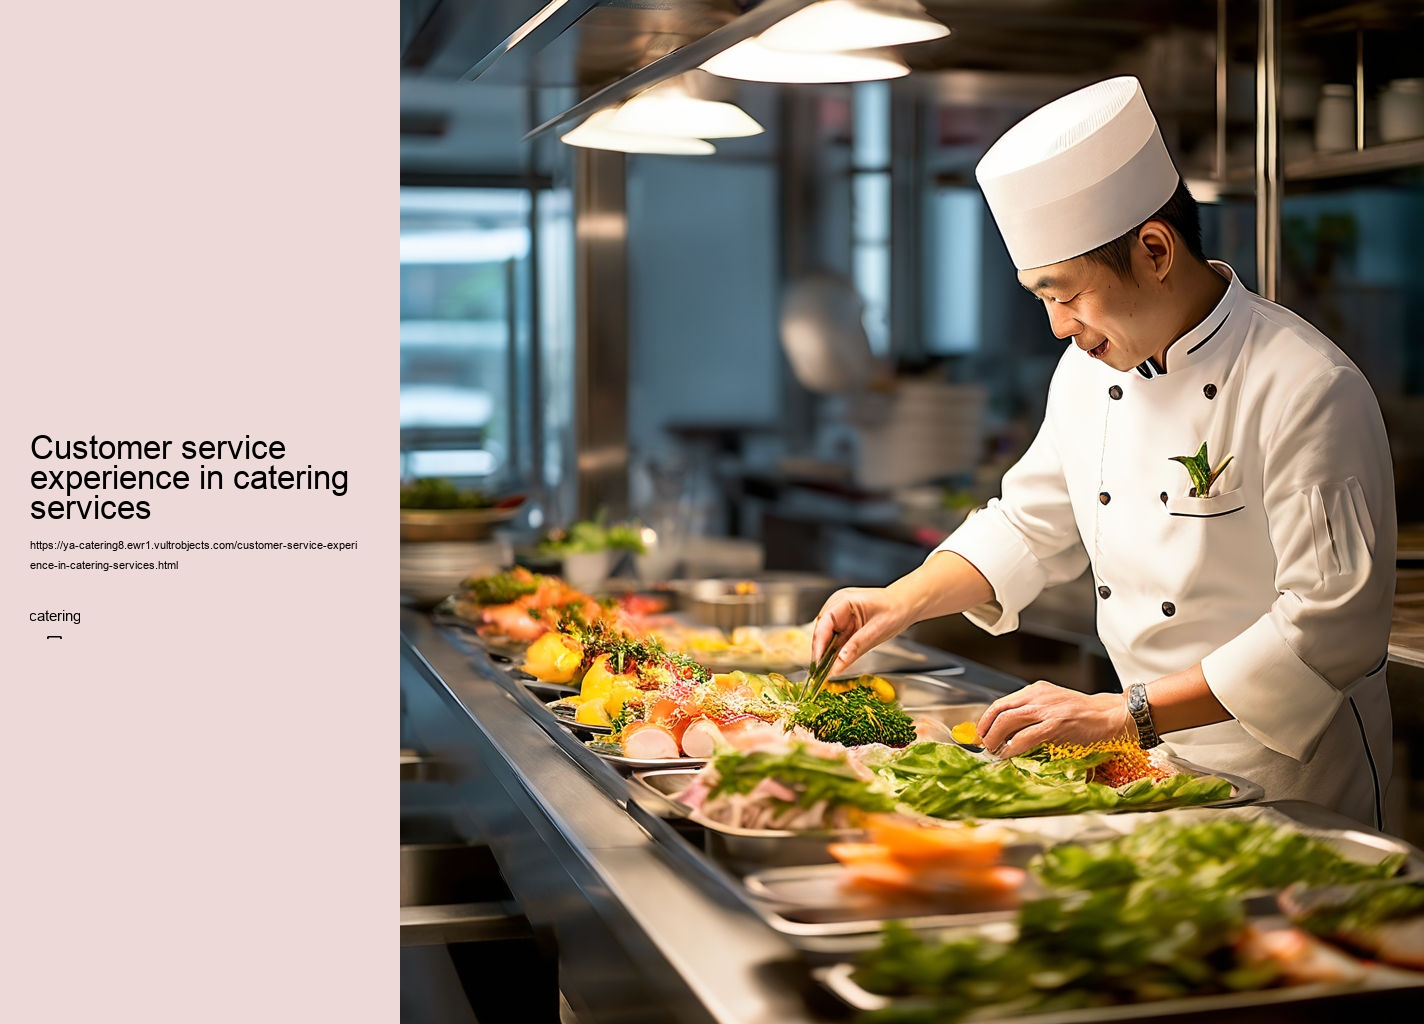 Customer service experience in catering services